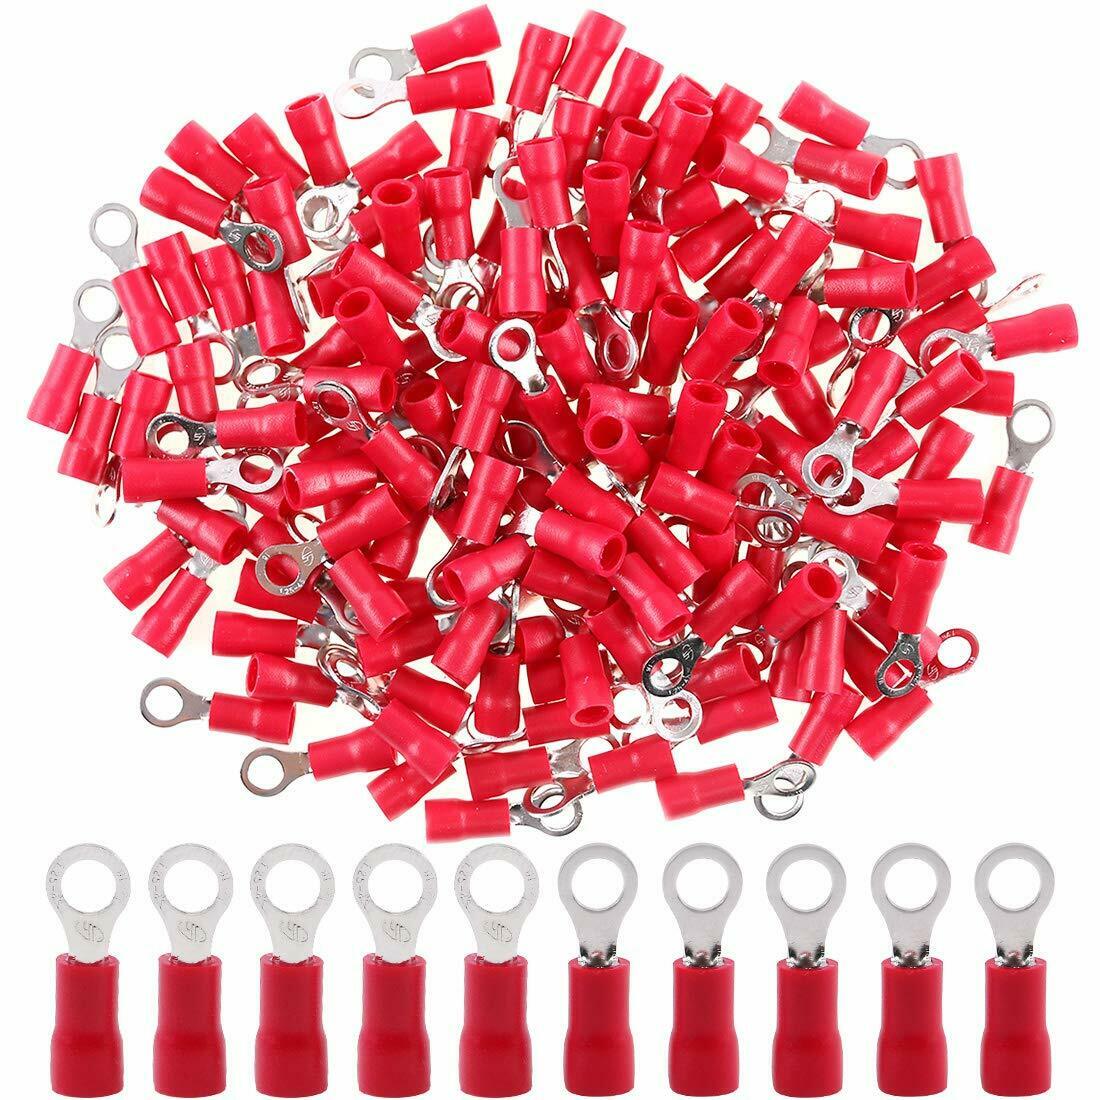 MR DJ  RT2218R-200 <br/>200 pcs #8 Red RT2218R 22/16 Gauge Vinyl Insulated Connectors Ring Terminal